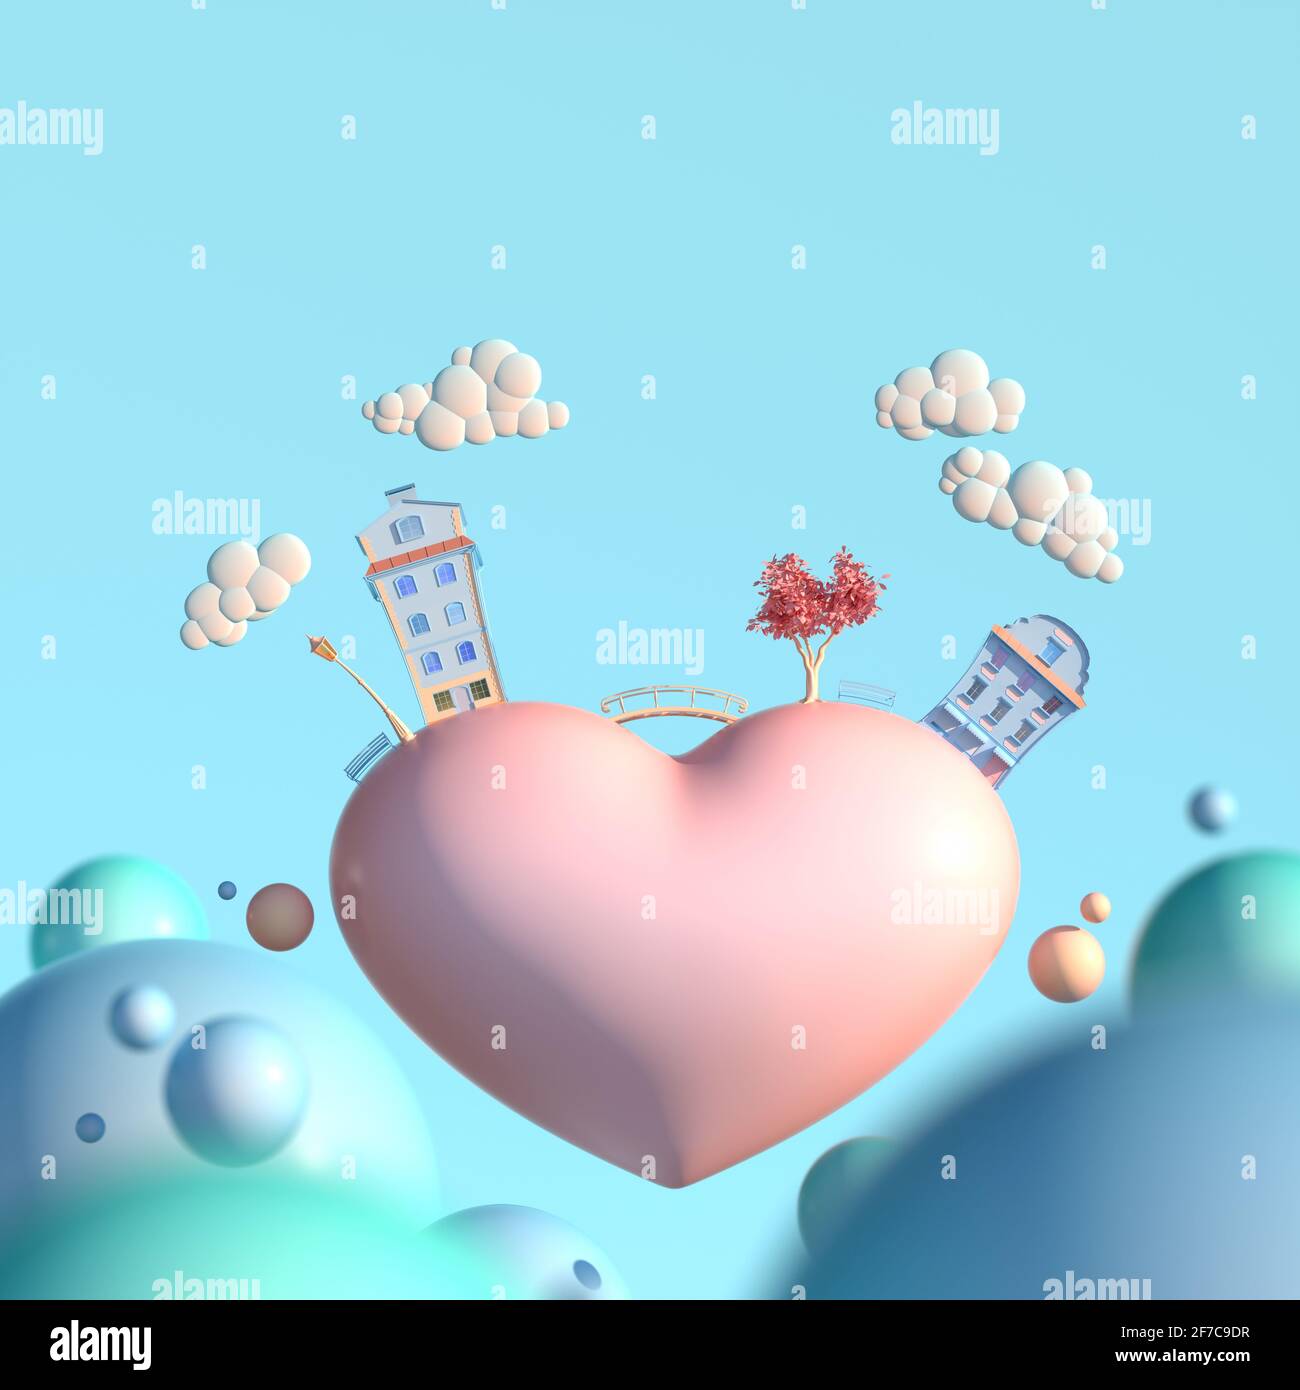 Heart-shaped planet with houses in a cartoon world. 3d illustration Stock Photo